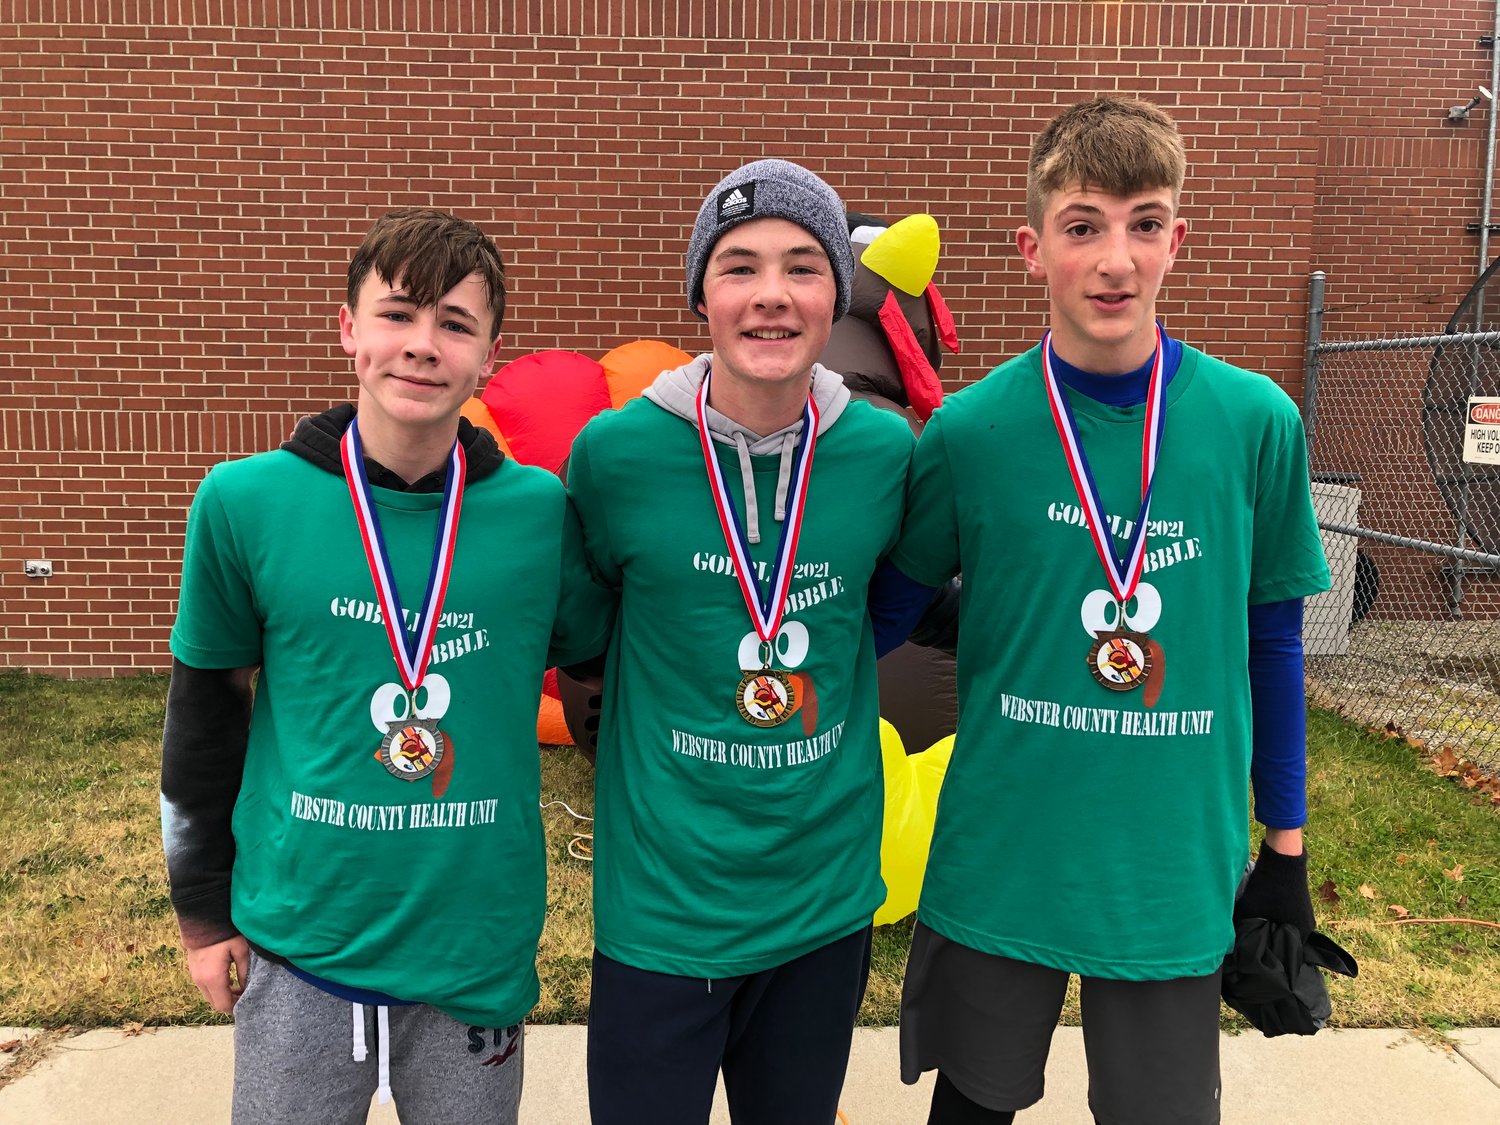 (Left to right) Jake Mitchell, 13, Zachary Mitchell, 15, and Samson Stalker, 14, finish top 3 at the 2021 Gobble Wobble.